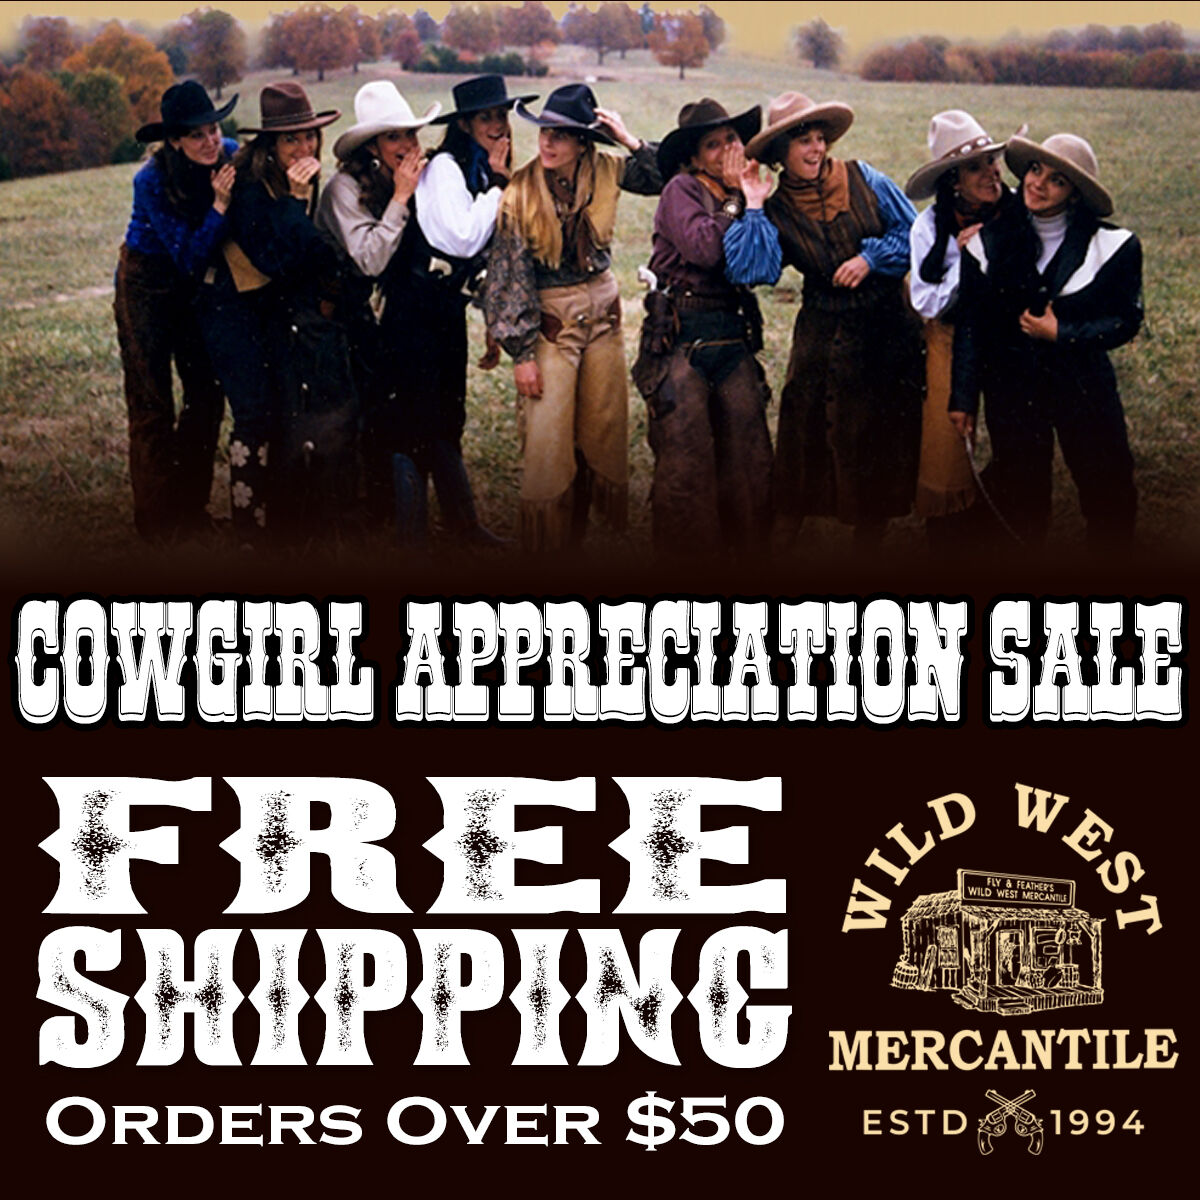 Yee Haw! it's Cowgirl Appreciation Days plus Free Shipping🤠Just in time for Mother's Day. Start Shopping 
bit.ly/3Wjwkle 
#wildwestmercantile #westernstore #westernsale #cowgirlsale #freeshipping #letsgogirls